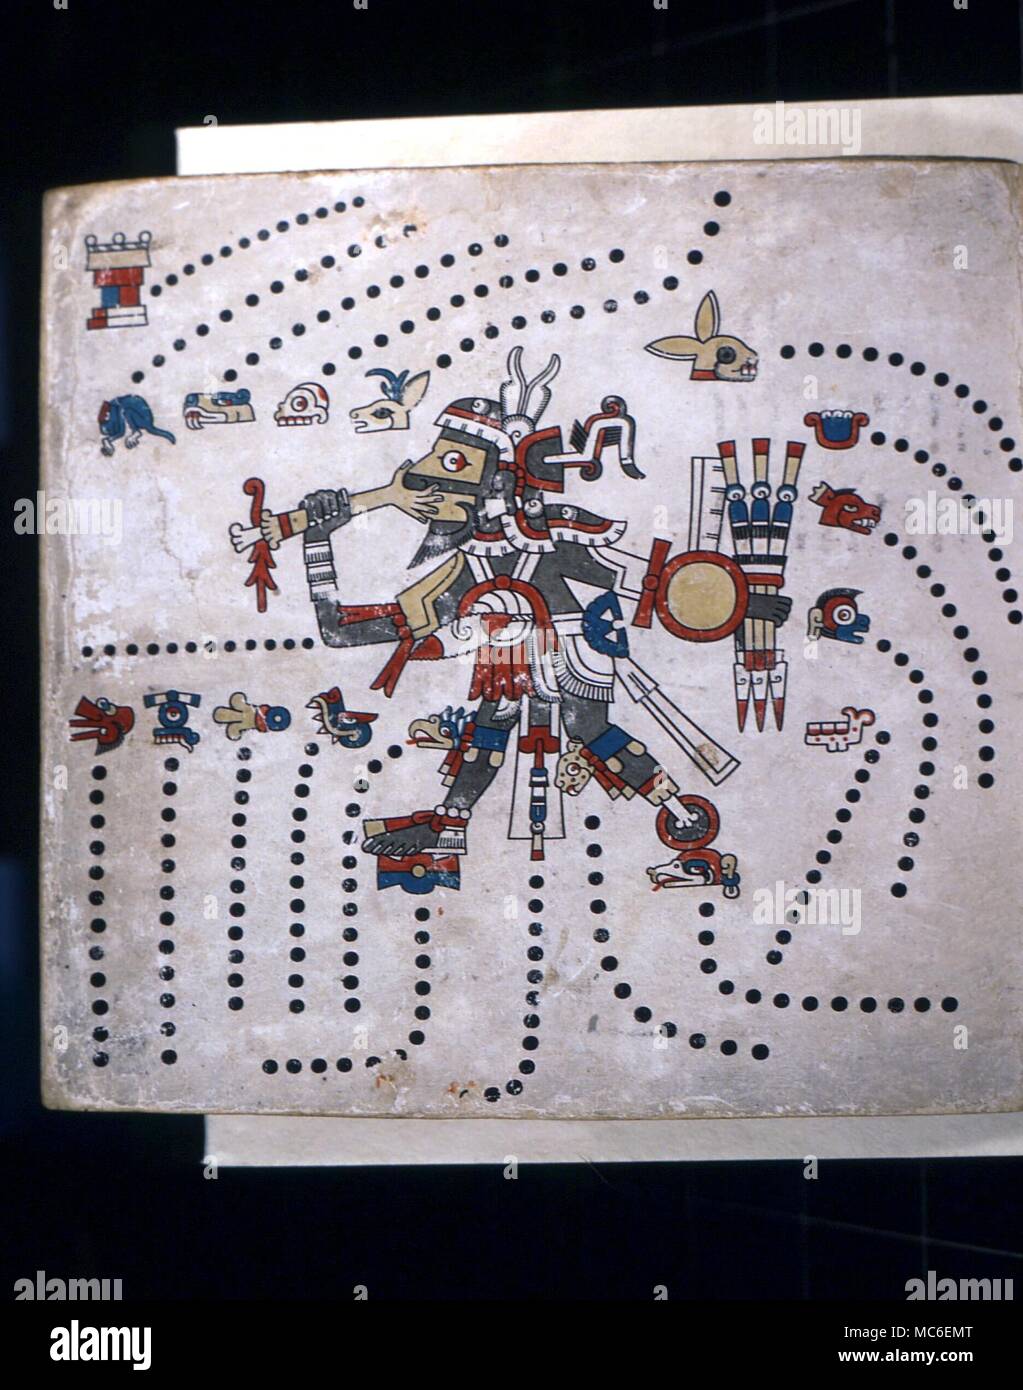 CALENDARS - Aztec Calendar The god, Tezcatlipoca, chief of the Aztec pantheon, with his missing foot, eating the palm of a sacrifical victim. He is surrounded by the symbols for the 20 day signs, the basis of the Aztec Calendar. From the Codex Fejervary-Mayer, Liverpool Stock Photo